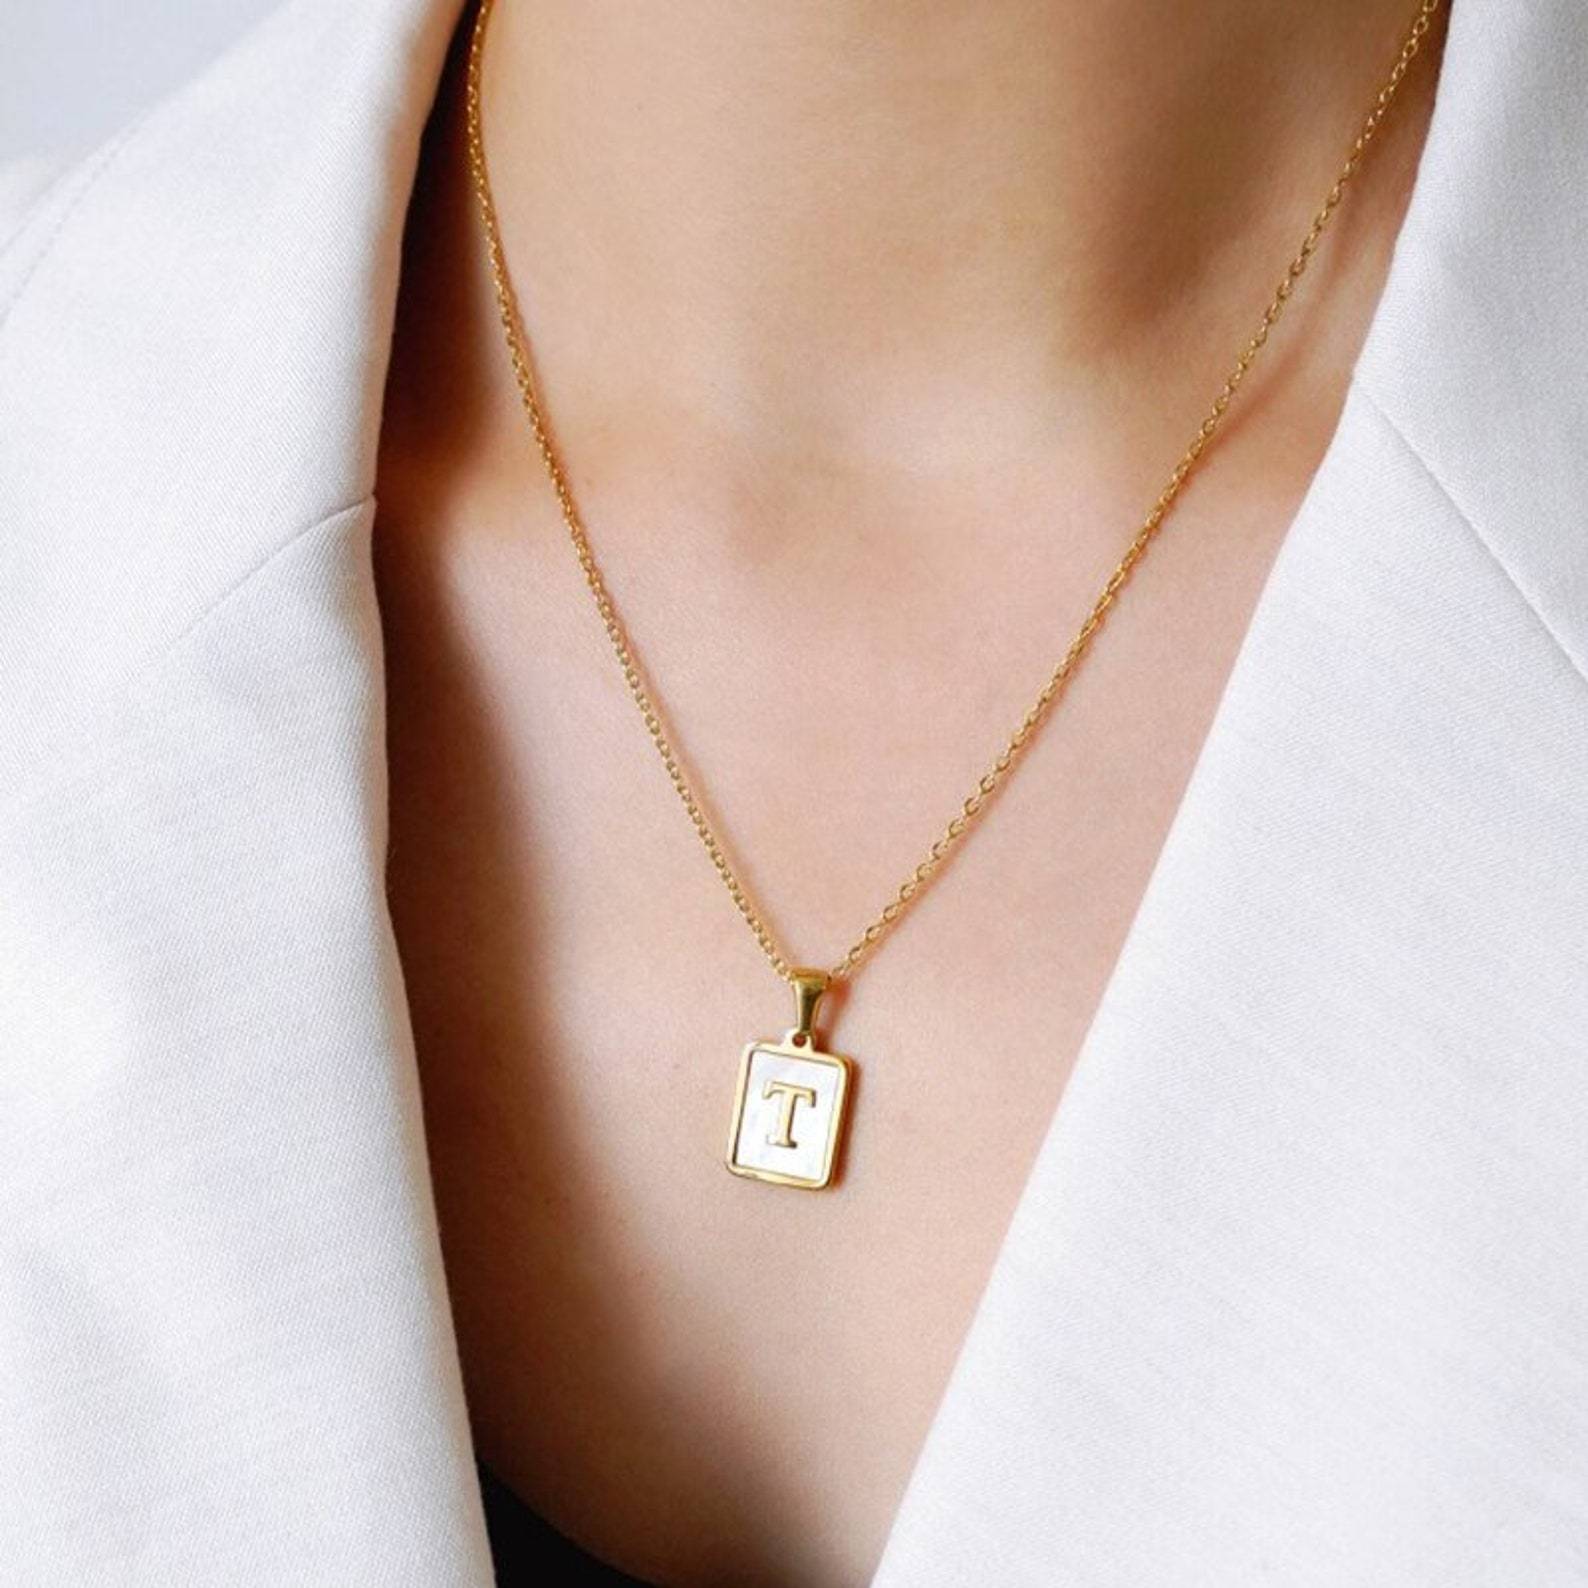 Gold Plated Mother of Pearl Pendant Necklace - Modern Accessory & Gift Idea Bijou Her